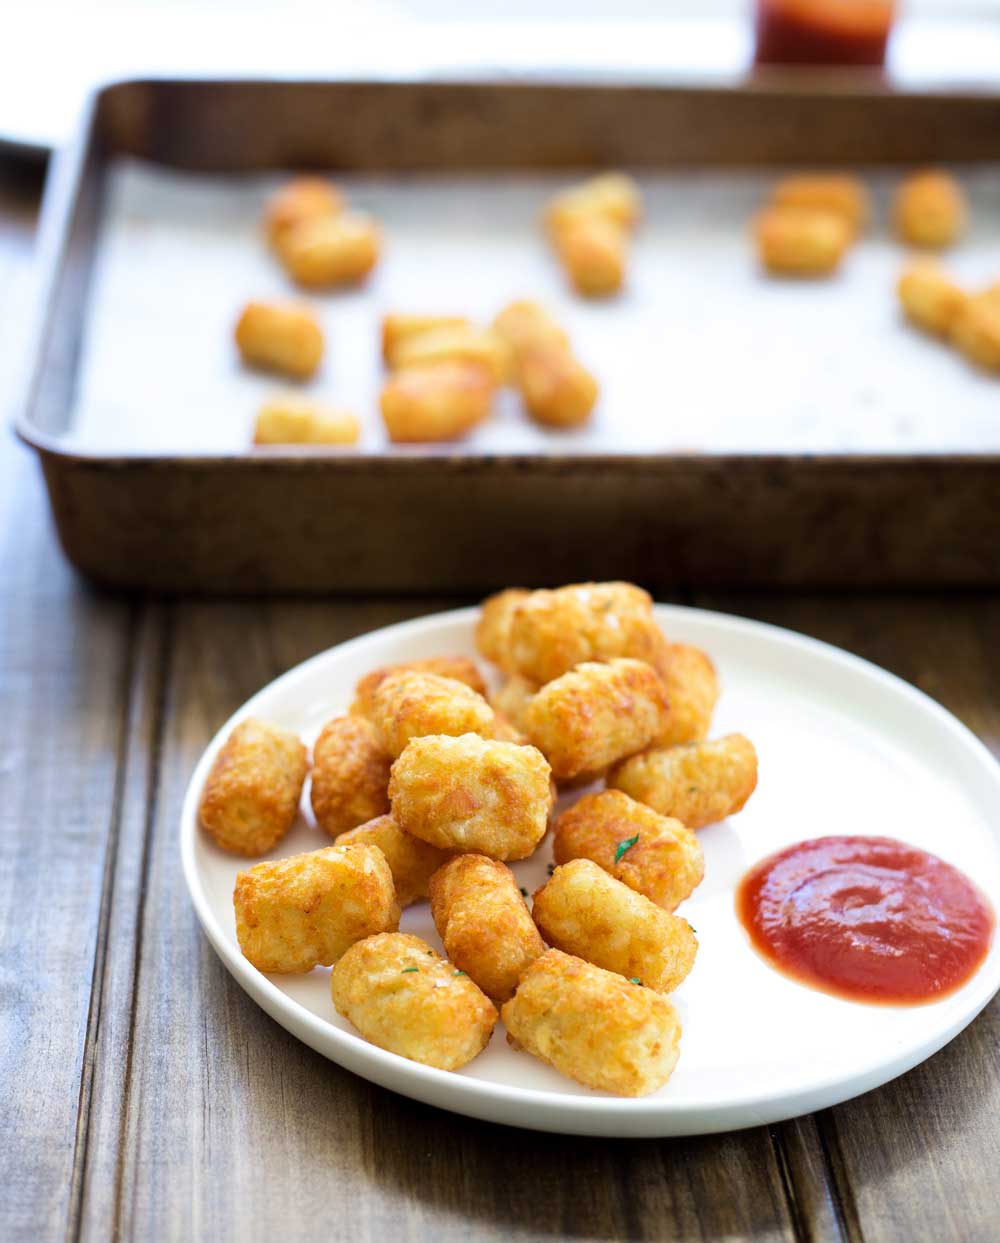 Homemade potato tots, shredded potato, cooked until crisp on the outside and fluffy inside. These homemade potato tots have just 4 ingredients (well 5 if you count salt) and are super simple to make. And keep reading for the best part of this whole recipe!!!